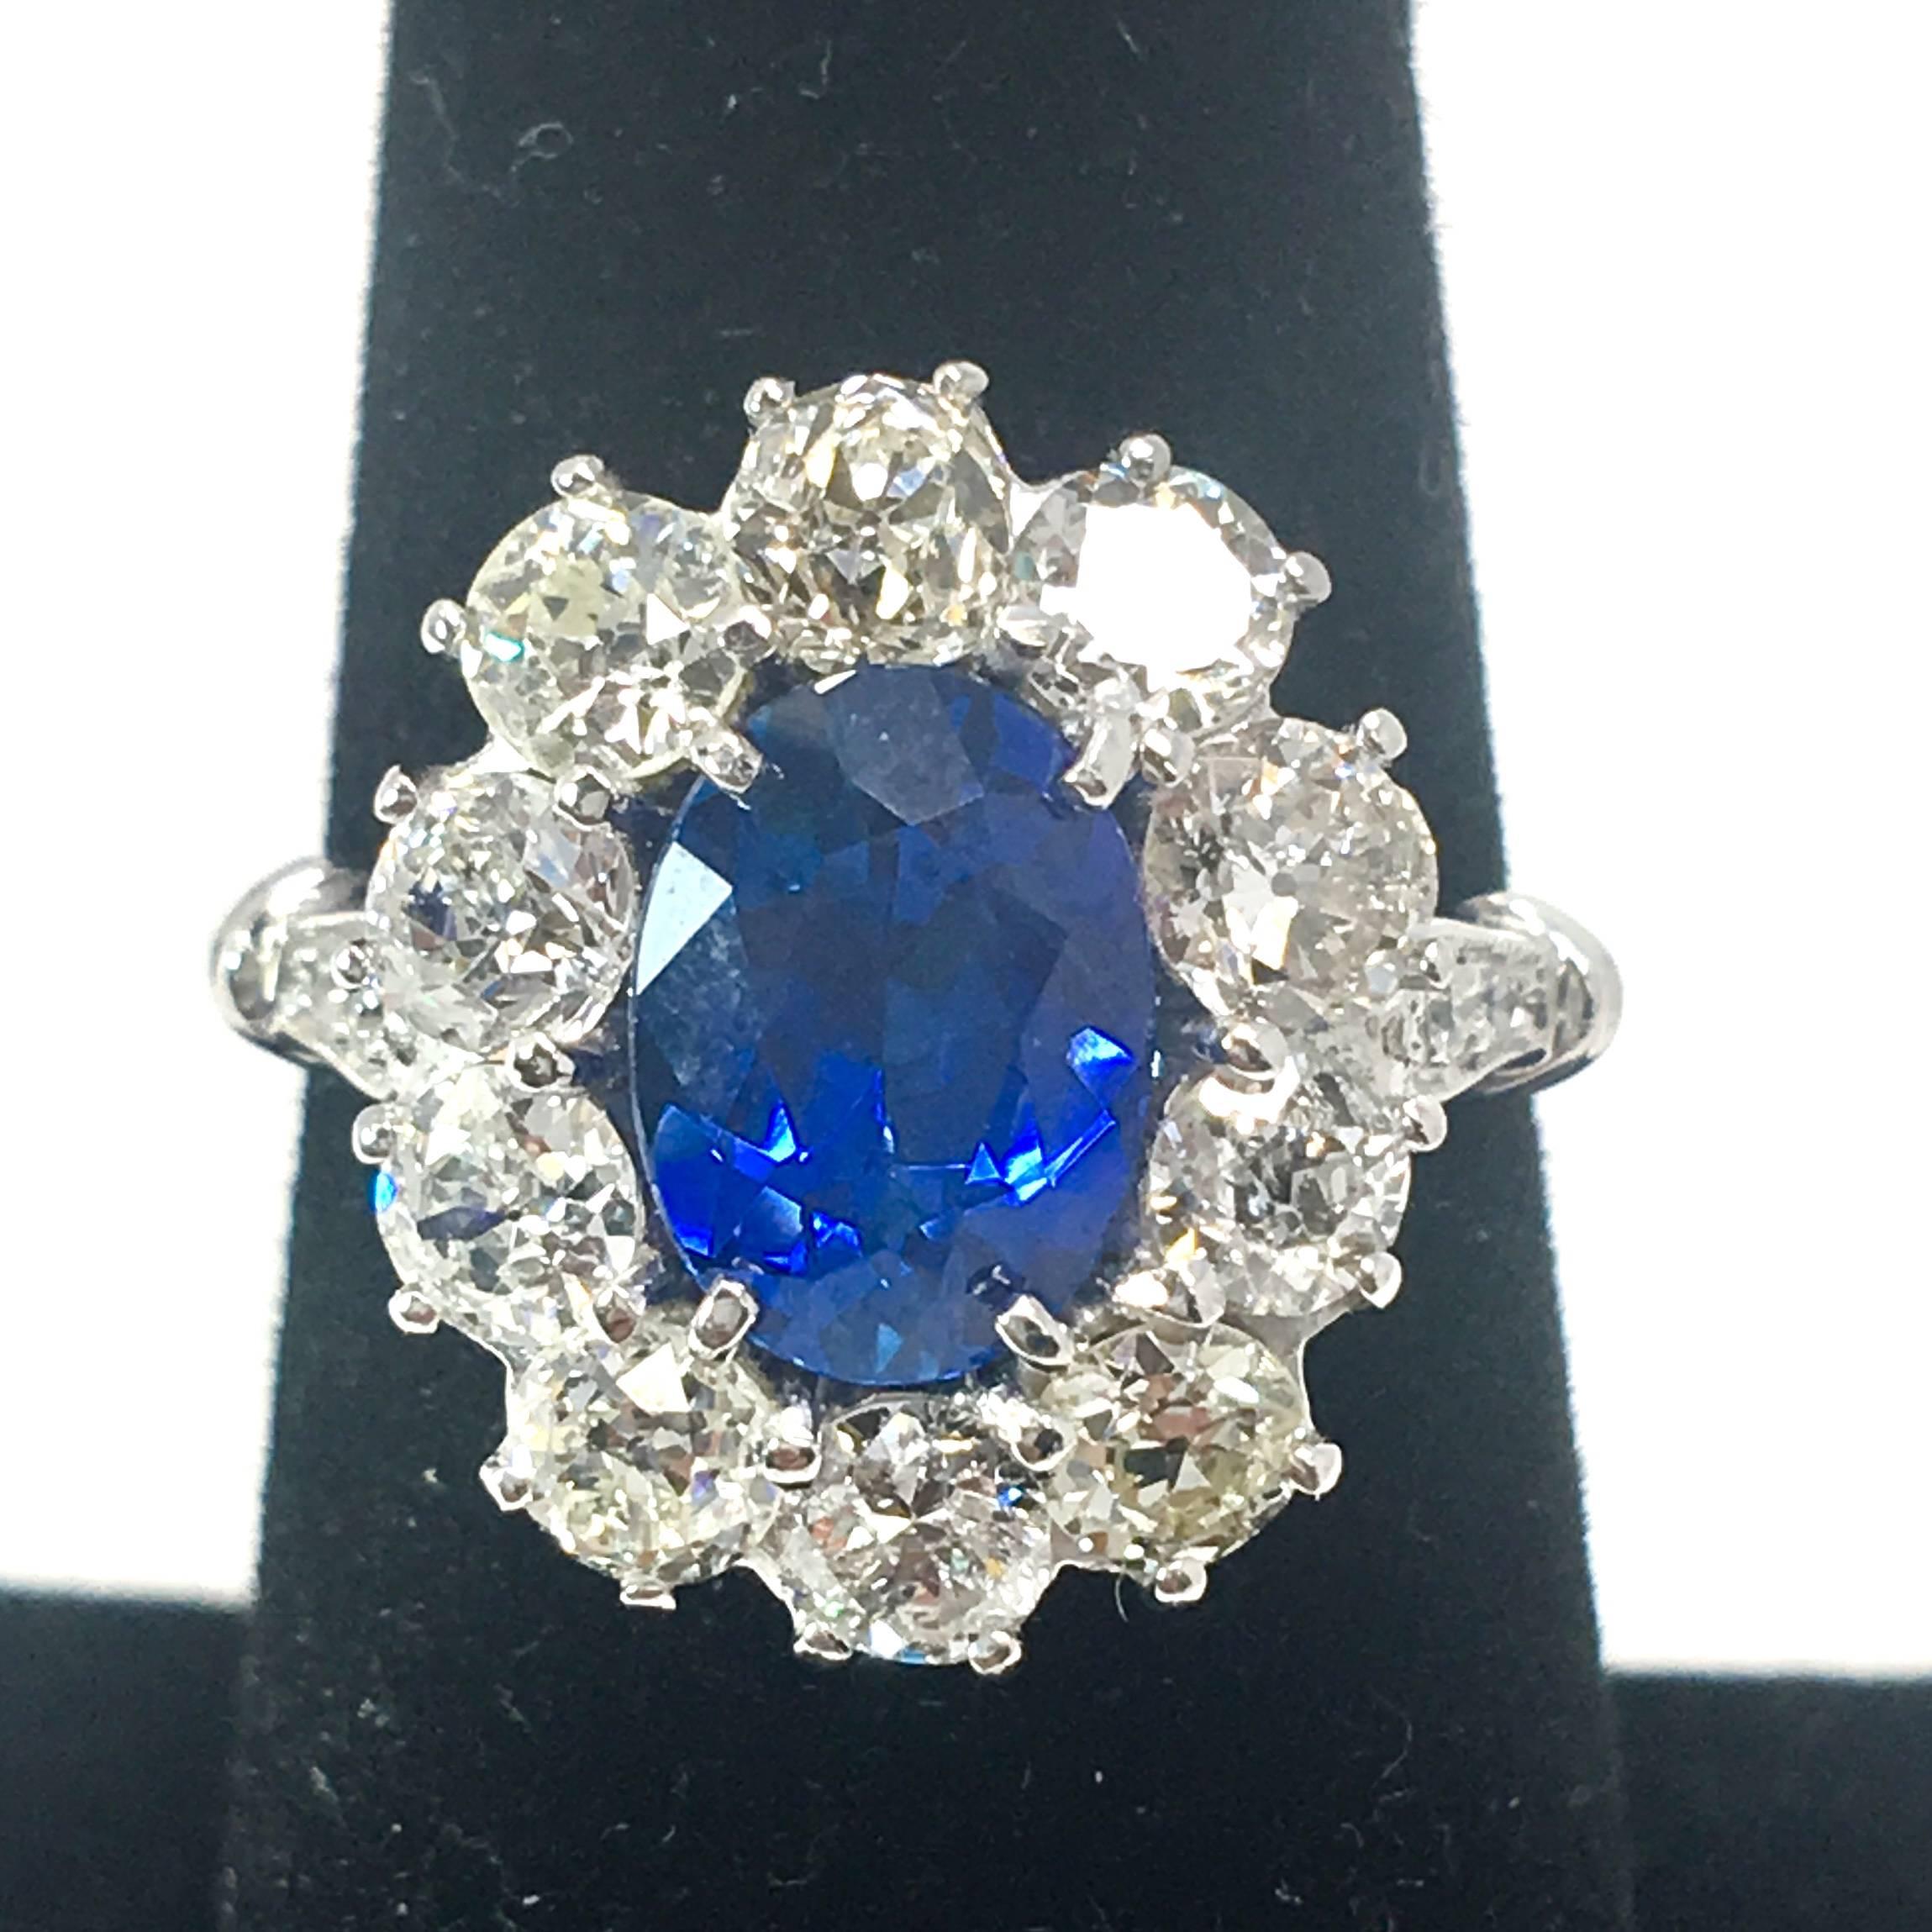 For sale is a gorgeous Platinum lady’s Diamond and Sapphire ring! 
Showcasing one (1) Oval natural blue Sapphire, four prong set, measuring 8.89 x 6.54 x 4.28 mm, weighing approximately 1.92 carats. 
The sapphire is surrounded by a beautiful halo of